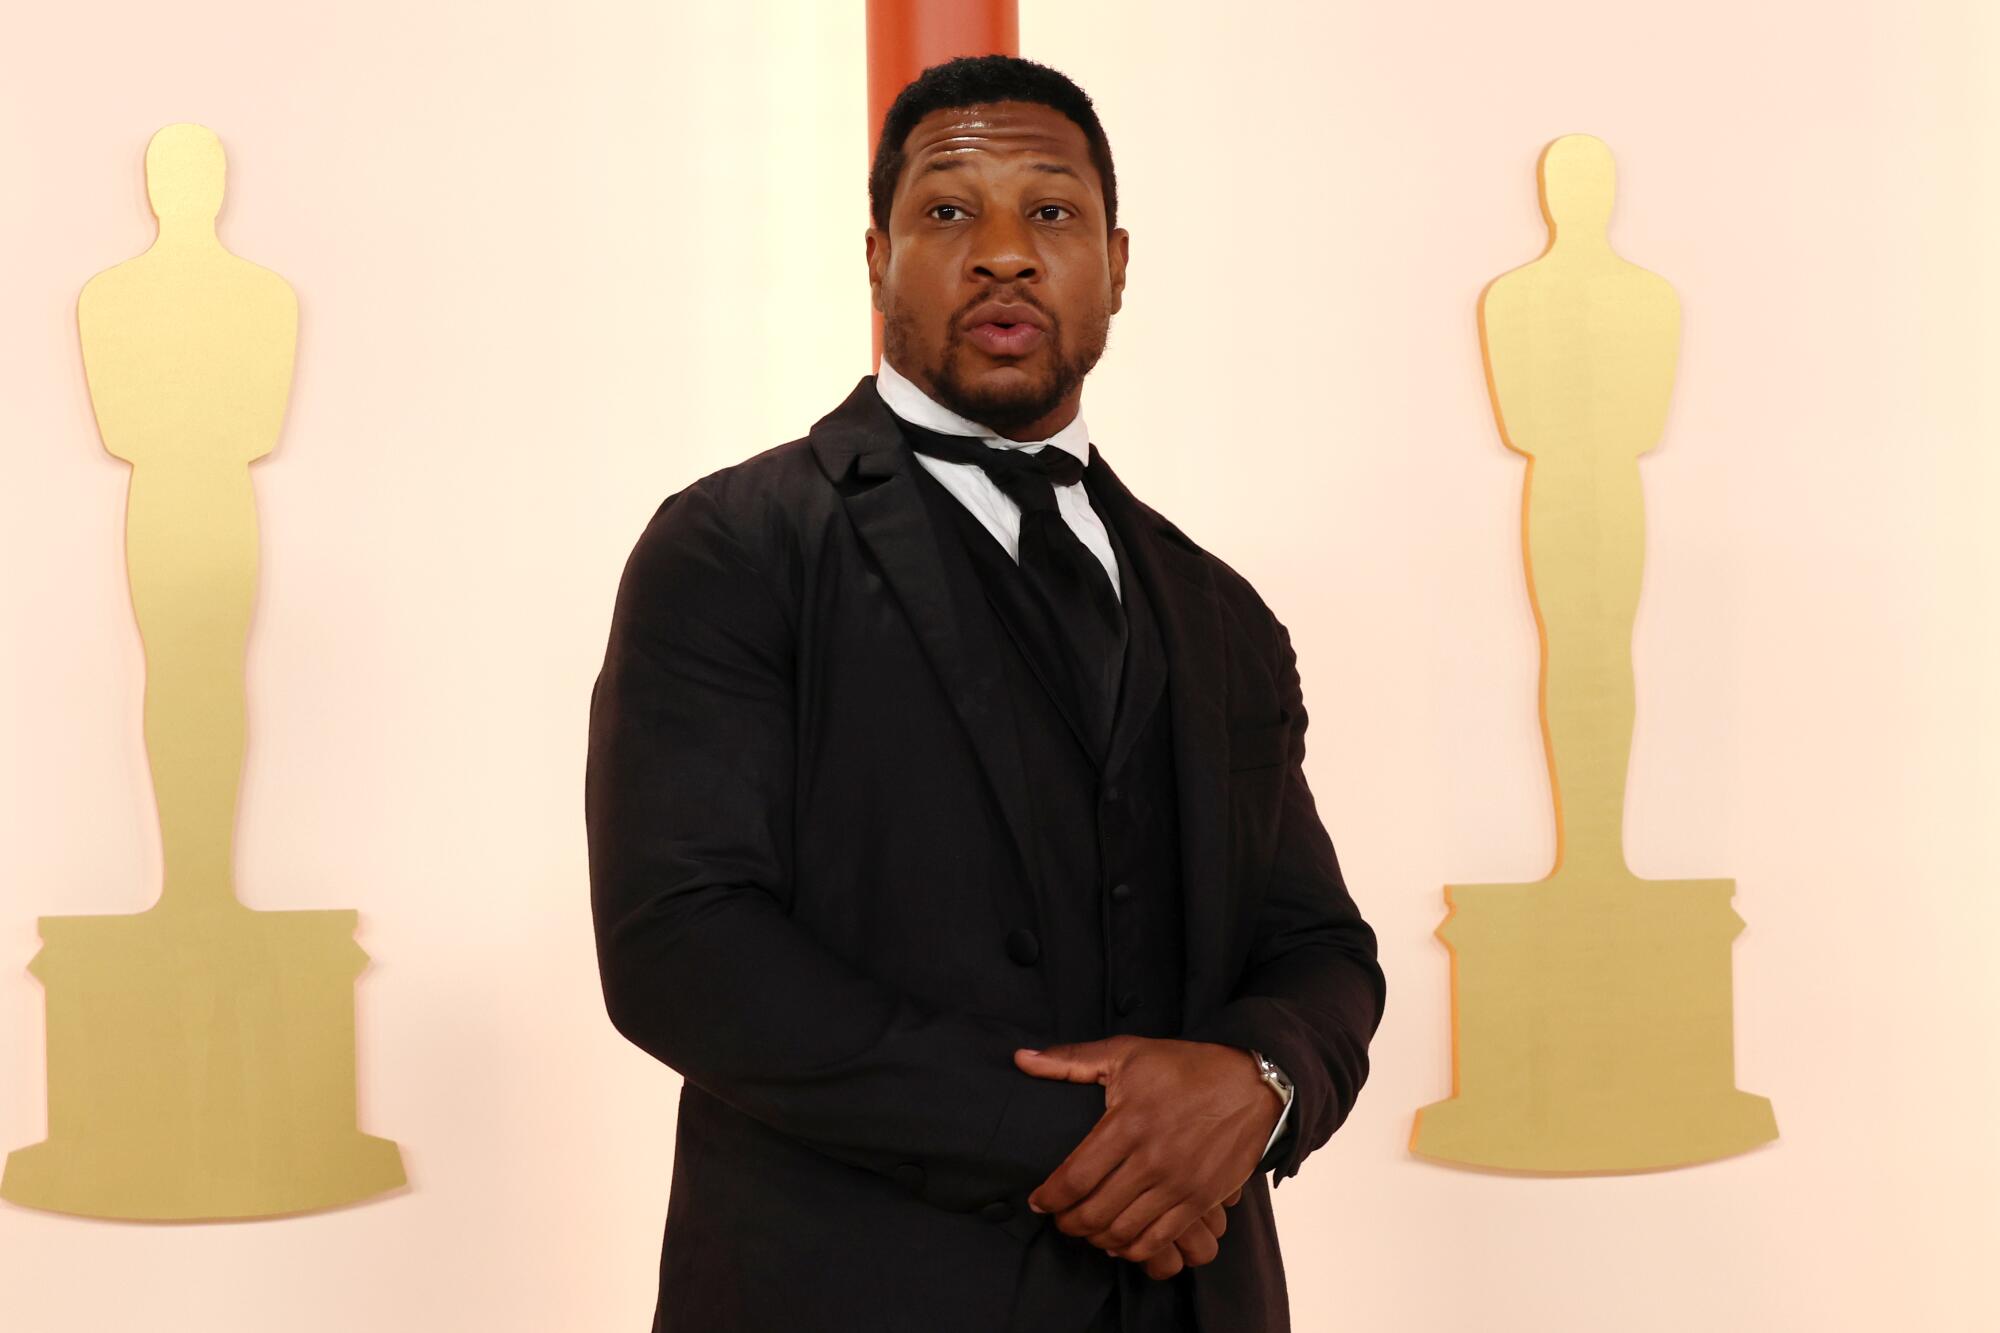 Jonathan Majors in a three-piece black suit with middle-1800s-style shirt collar and tie. 